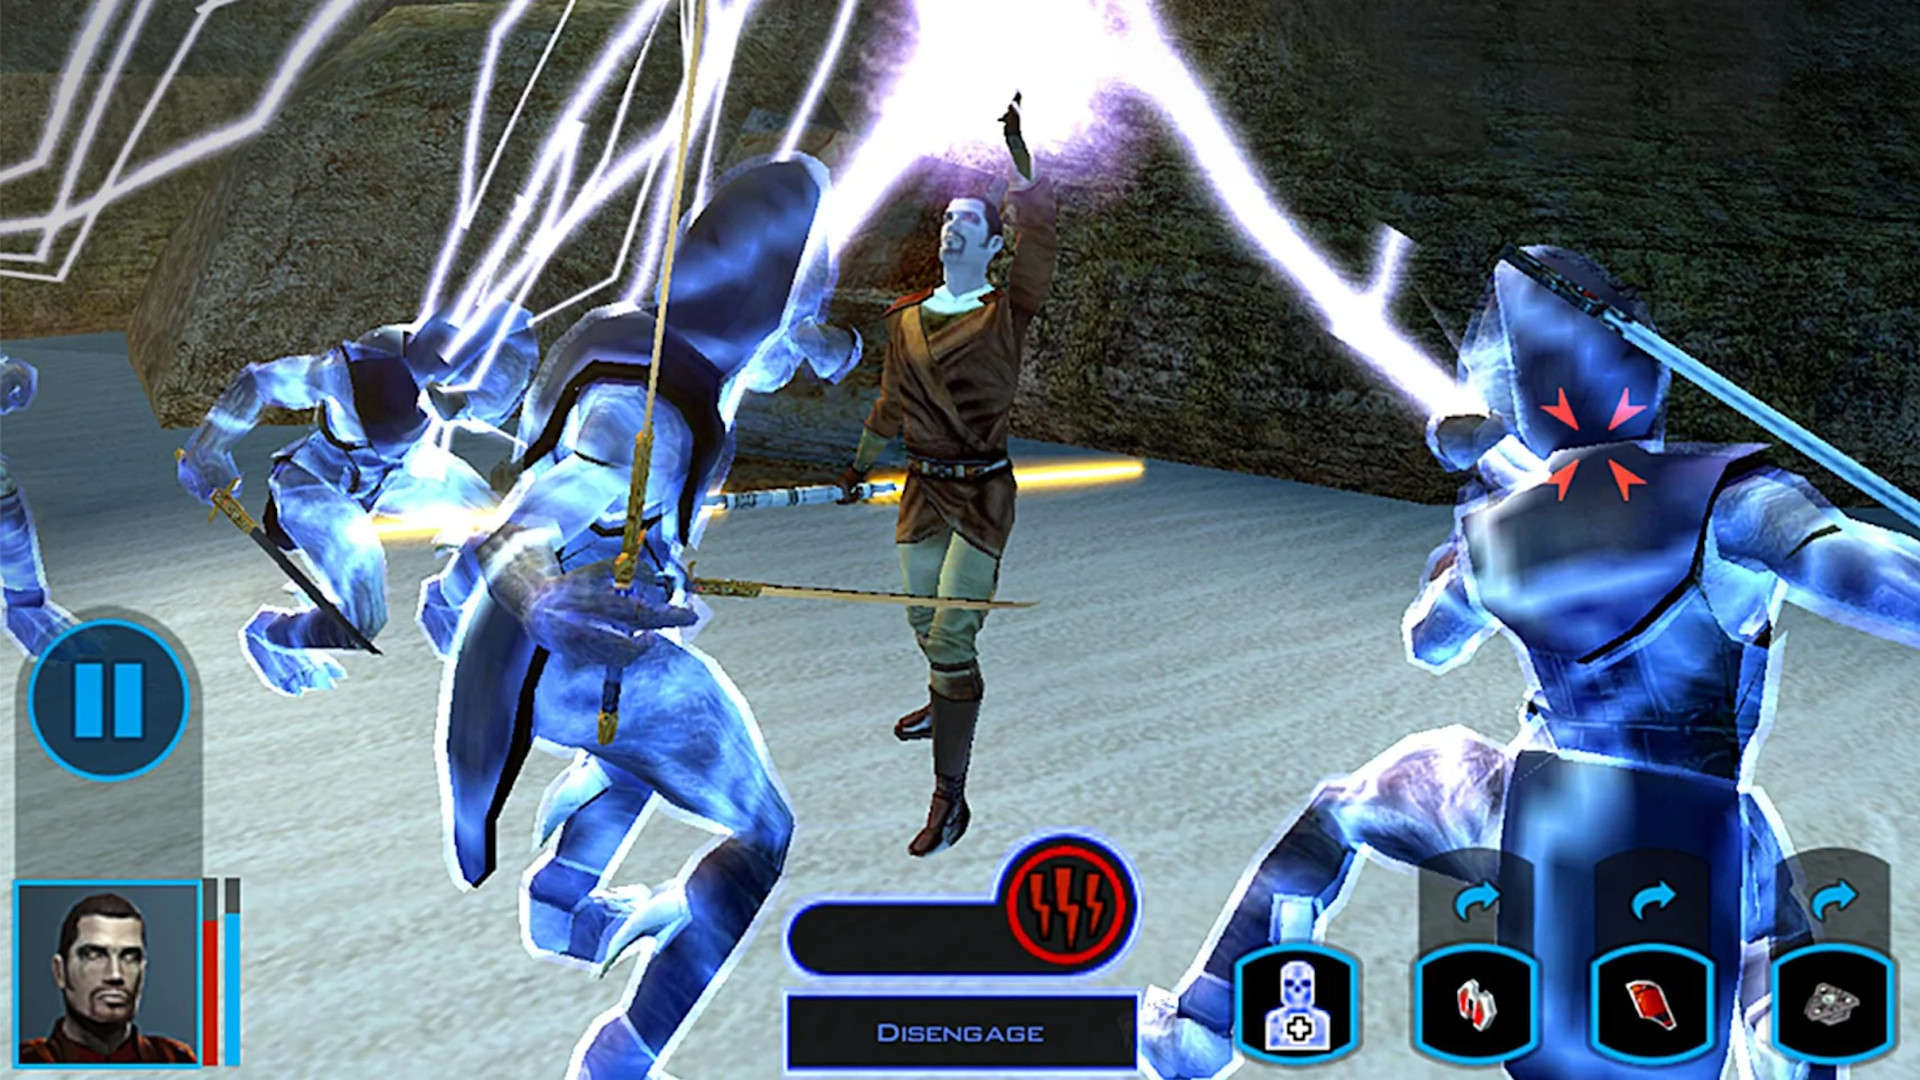 Best iOS games - Star Wars: Knights of the Old Republic. Image shows a force user summoning lightning.